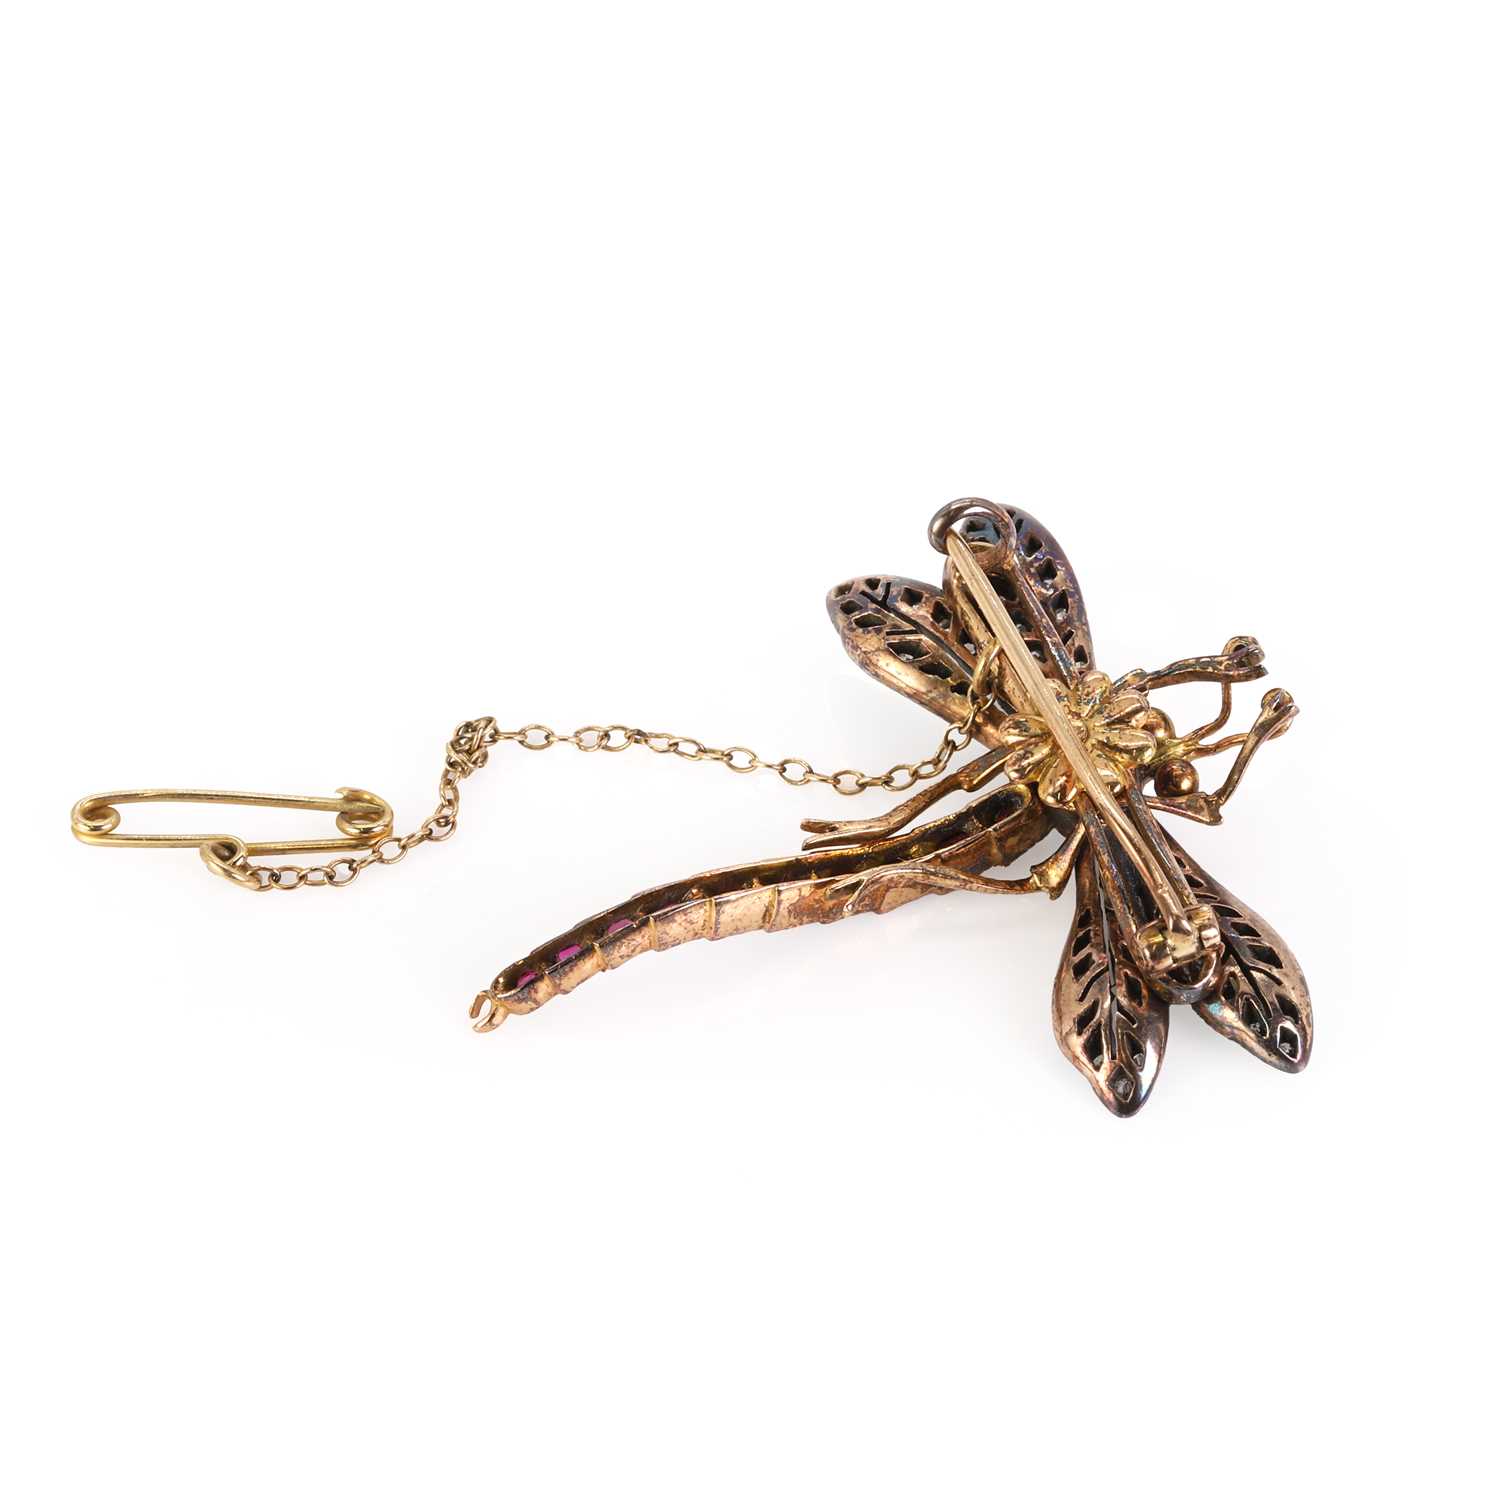 A diamond and gemstone set dragonfly brooch, c.1890, - Image 4 of 4